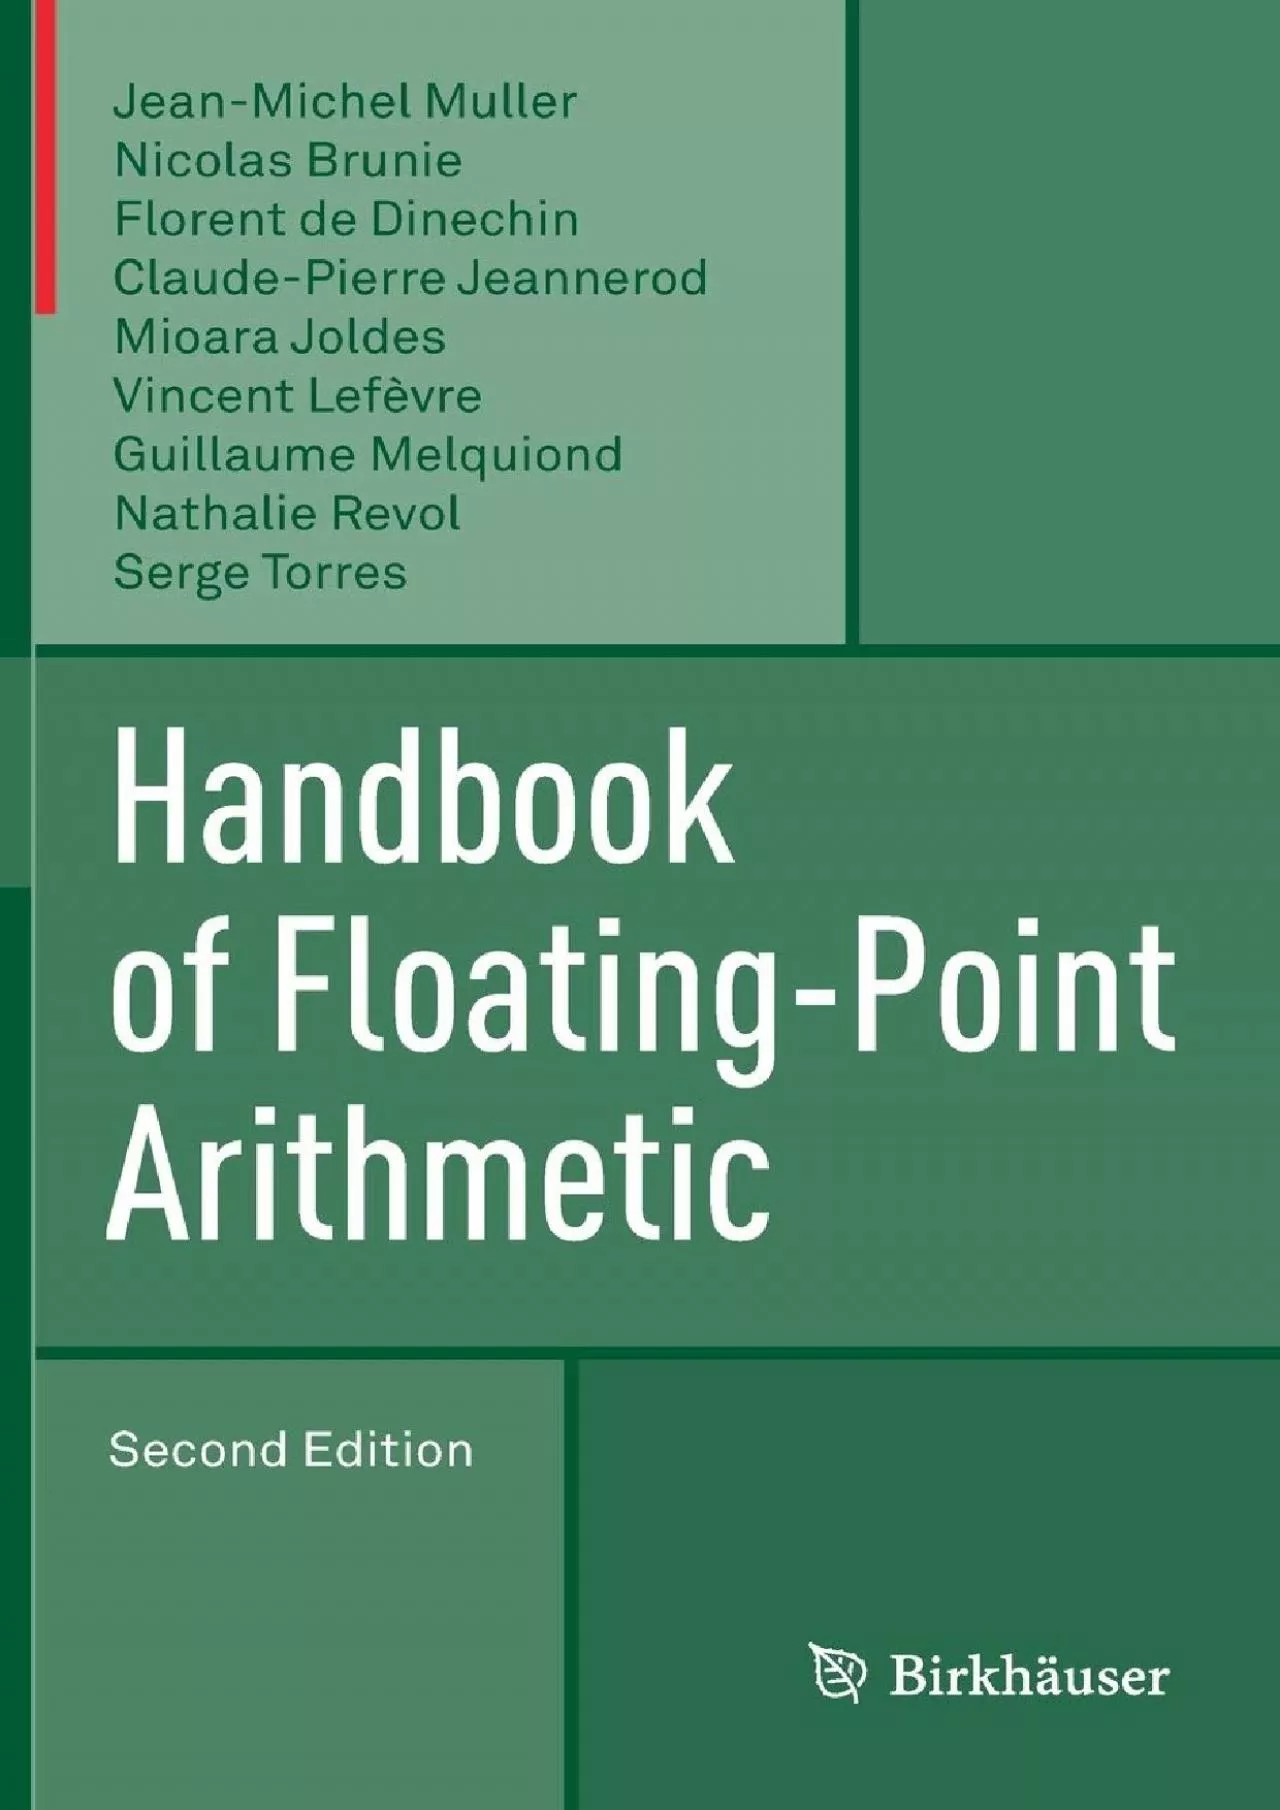 [READING BOOK]-Handbook of Floating-Point Arithmetic